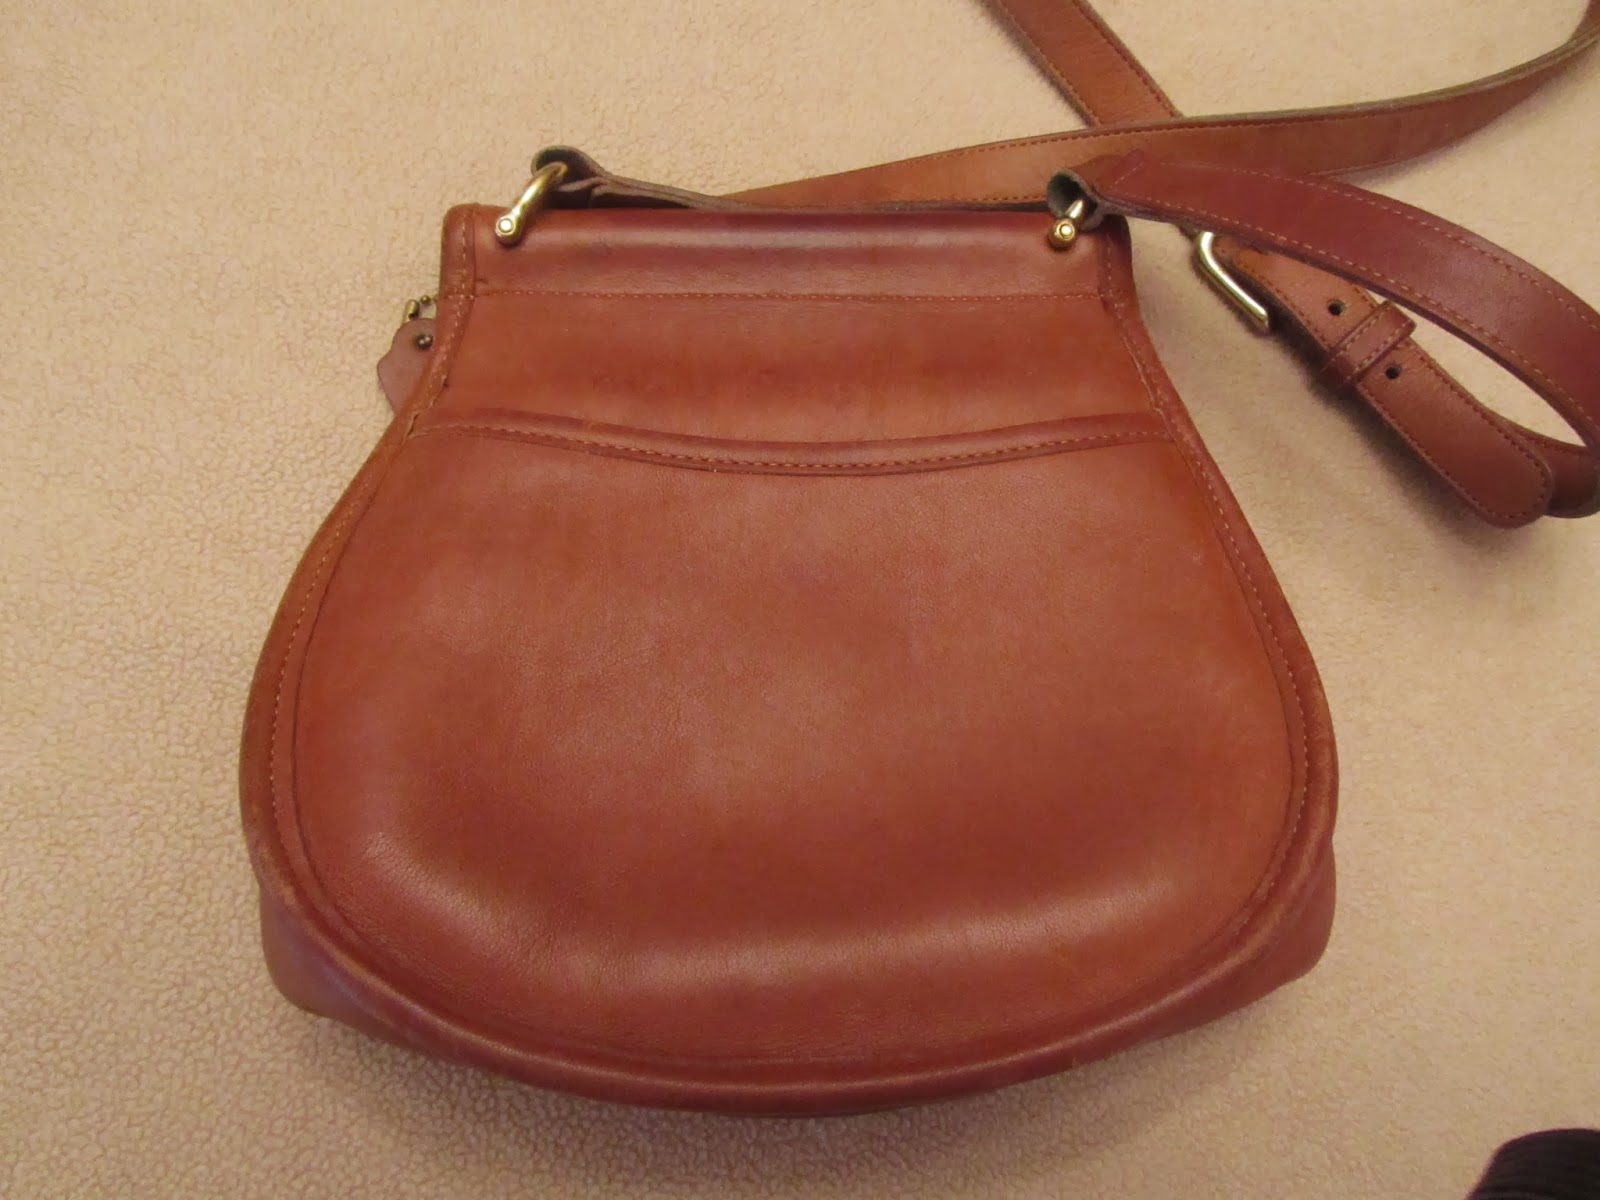 I'm With Leather - Coach Bag Restoration Projects: Before and After ...